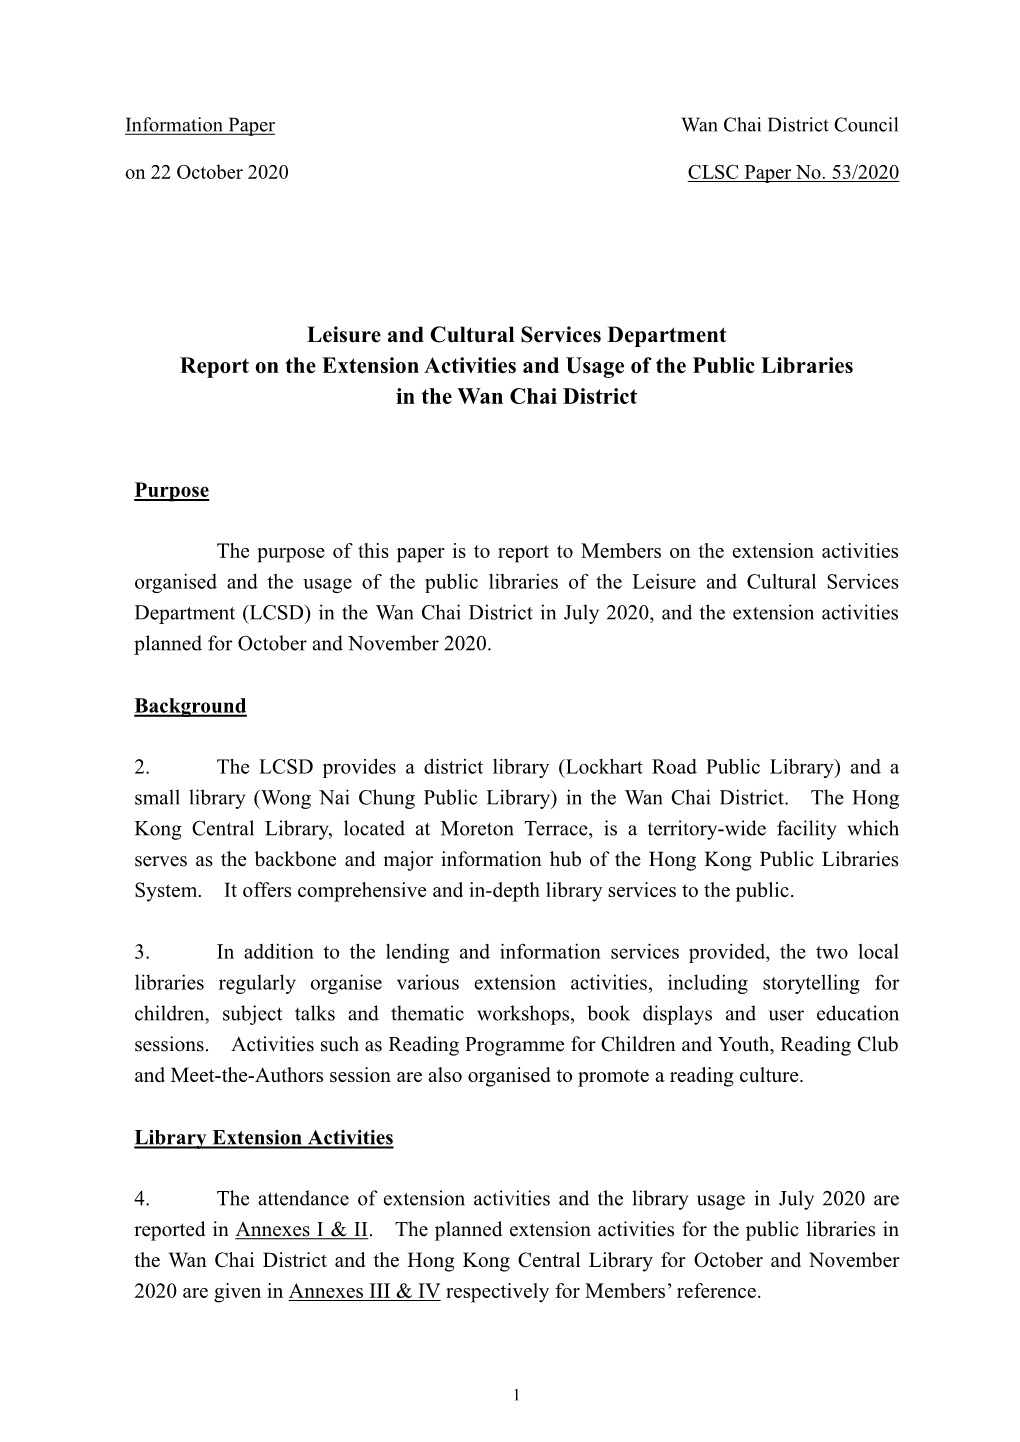 Leisure and Cultural Services Department Report on the Extension Activities and Usage of the Public Libraries in the Wan Chai District